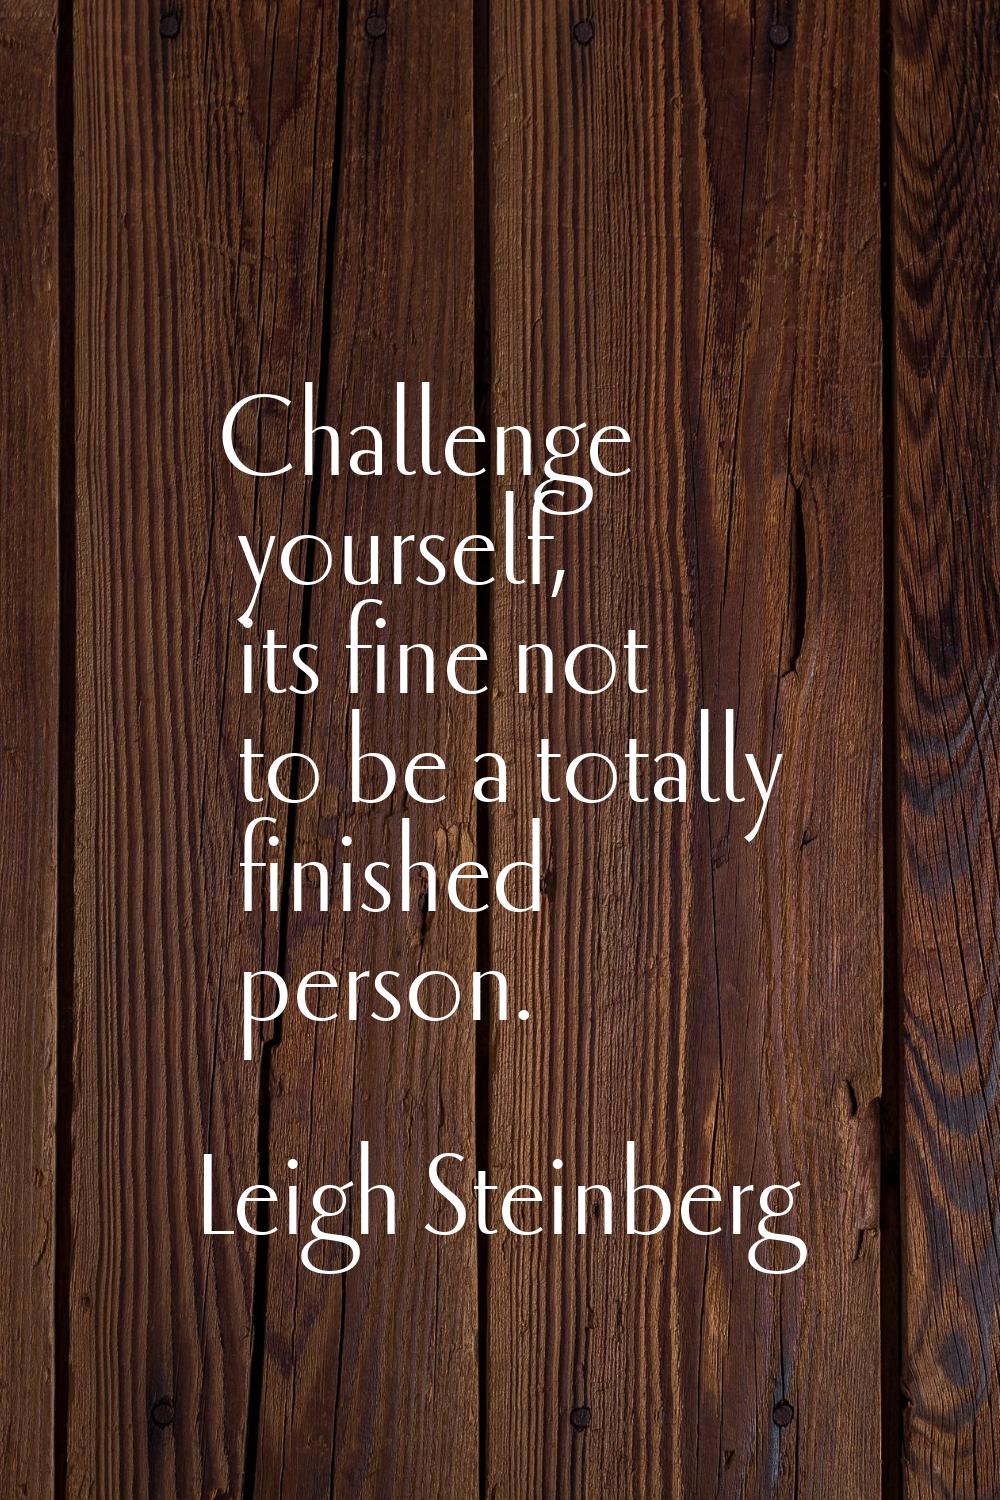 Challenge yourself, its fine not to be a totally finished person.